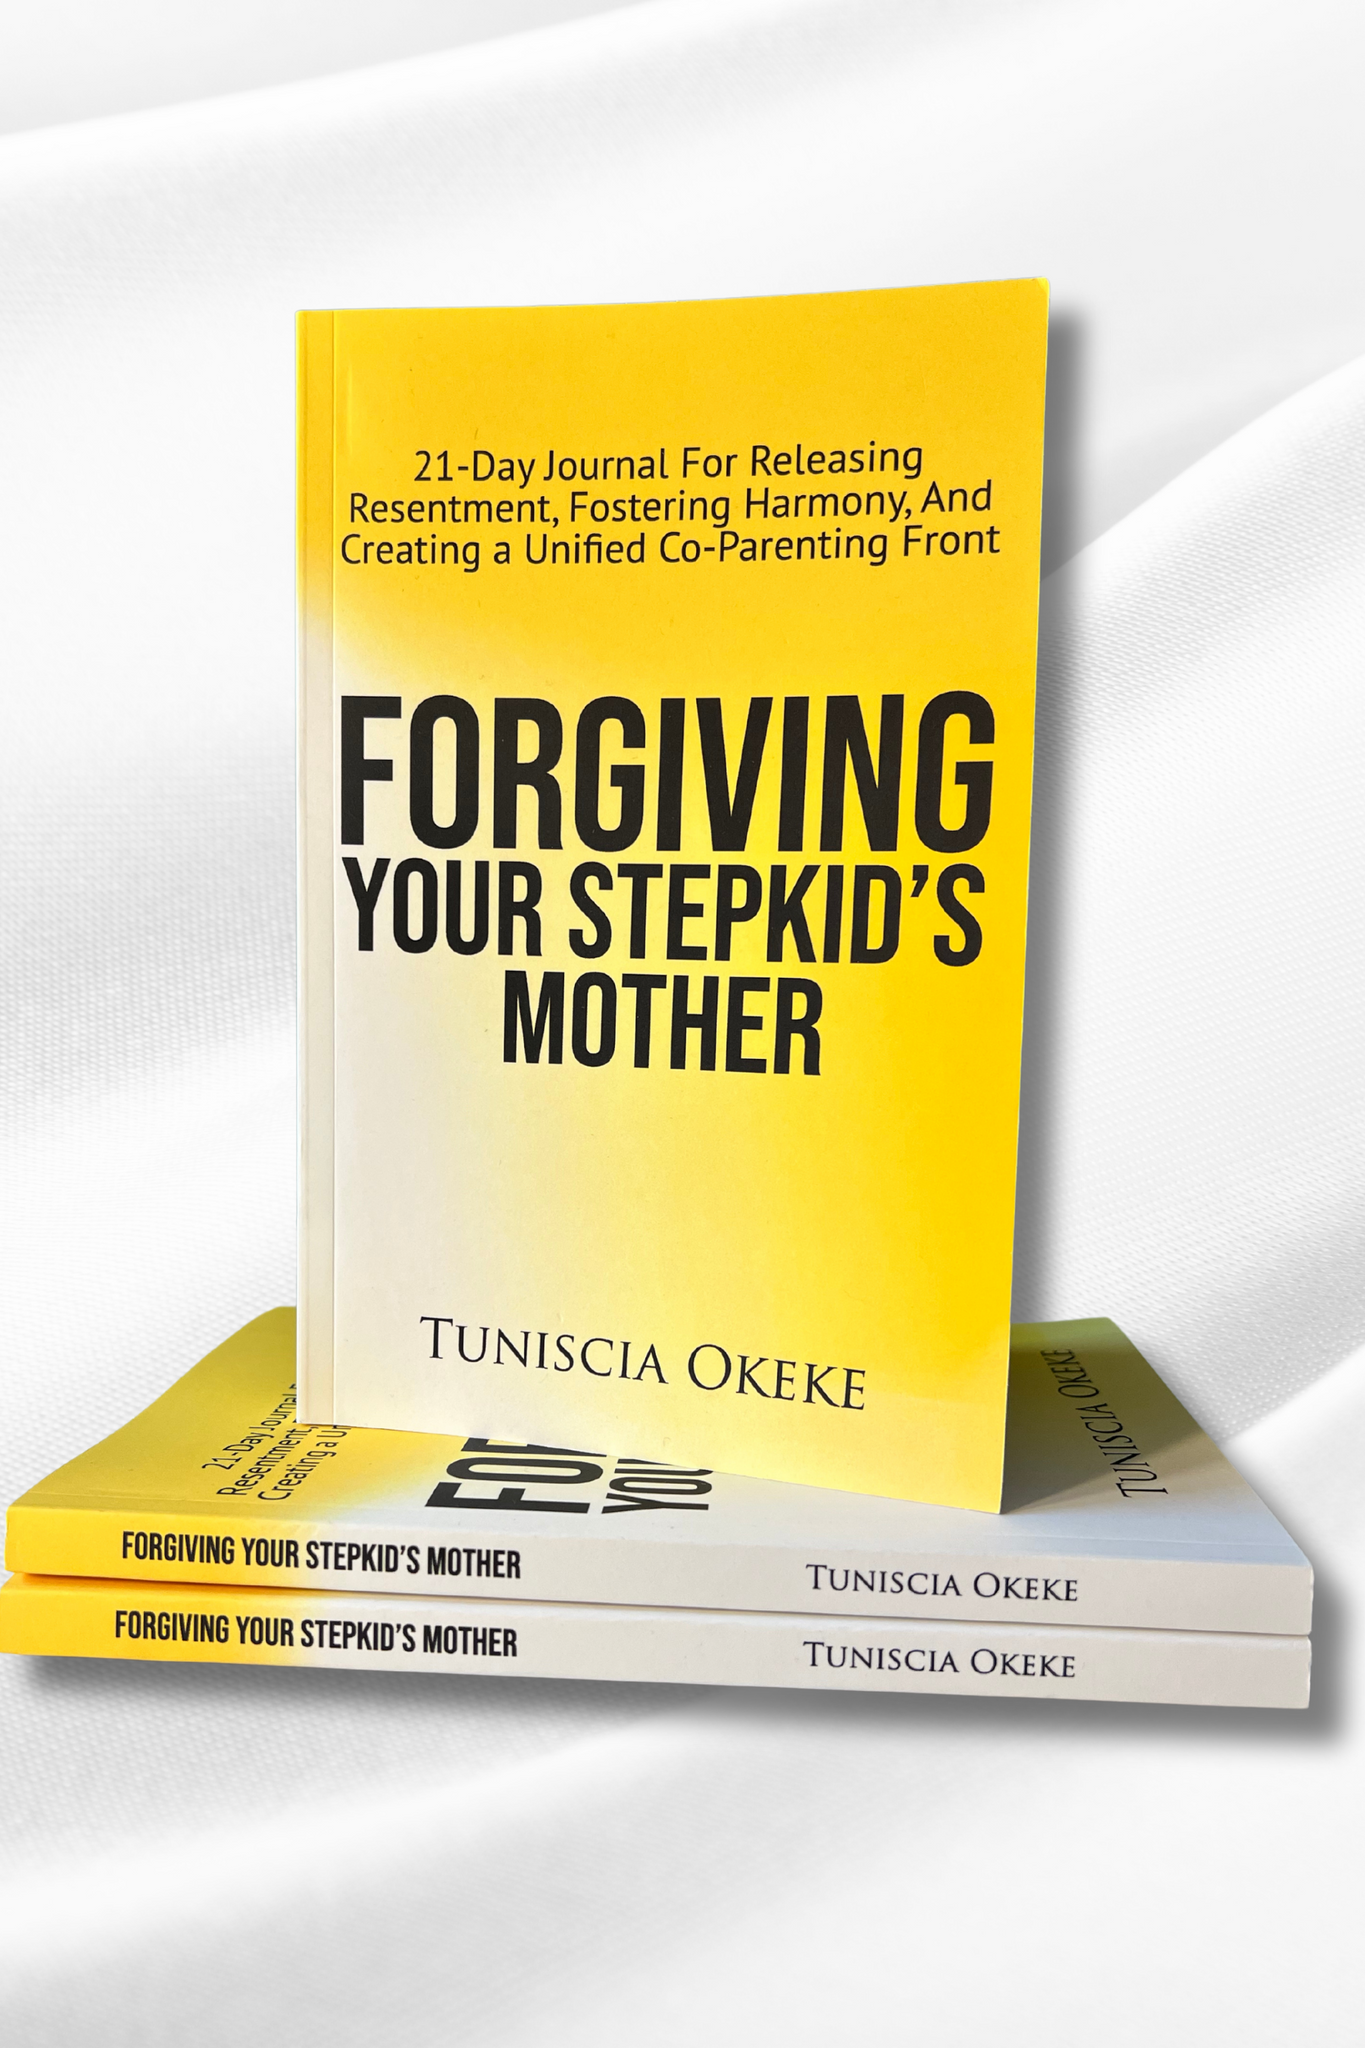 FORGIVING YOUR STEPKID'S MOTHER (GUIDED JOURNAL)